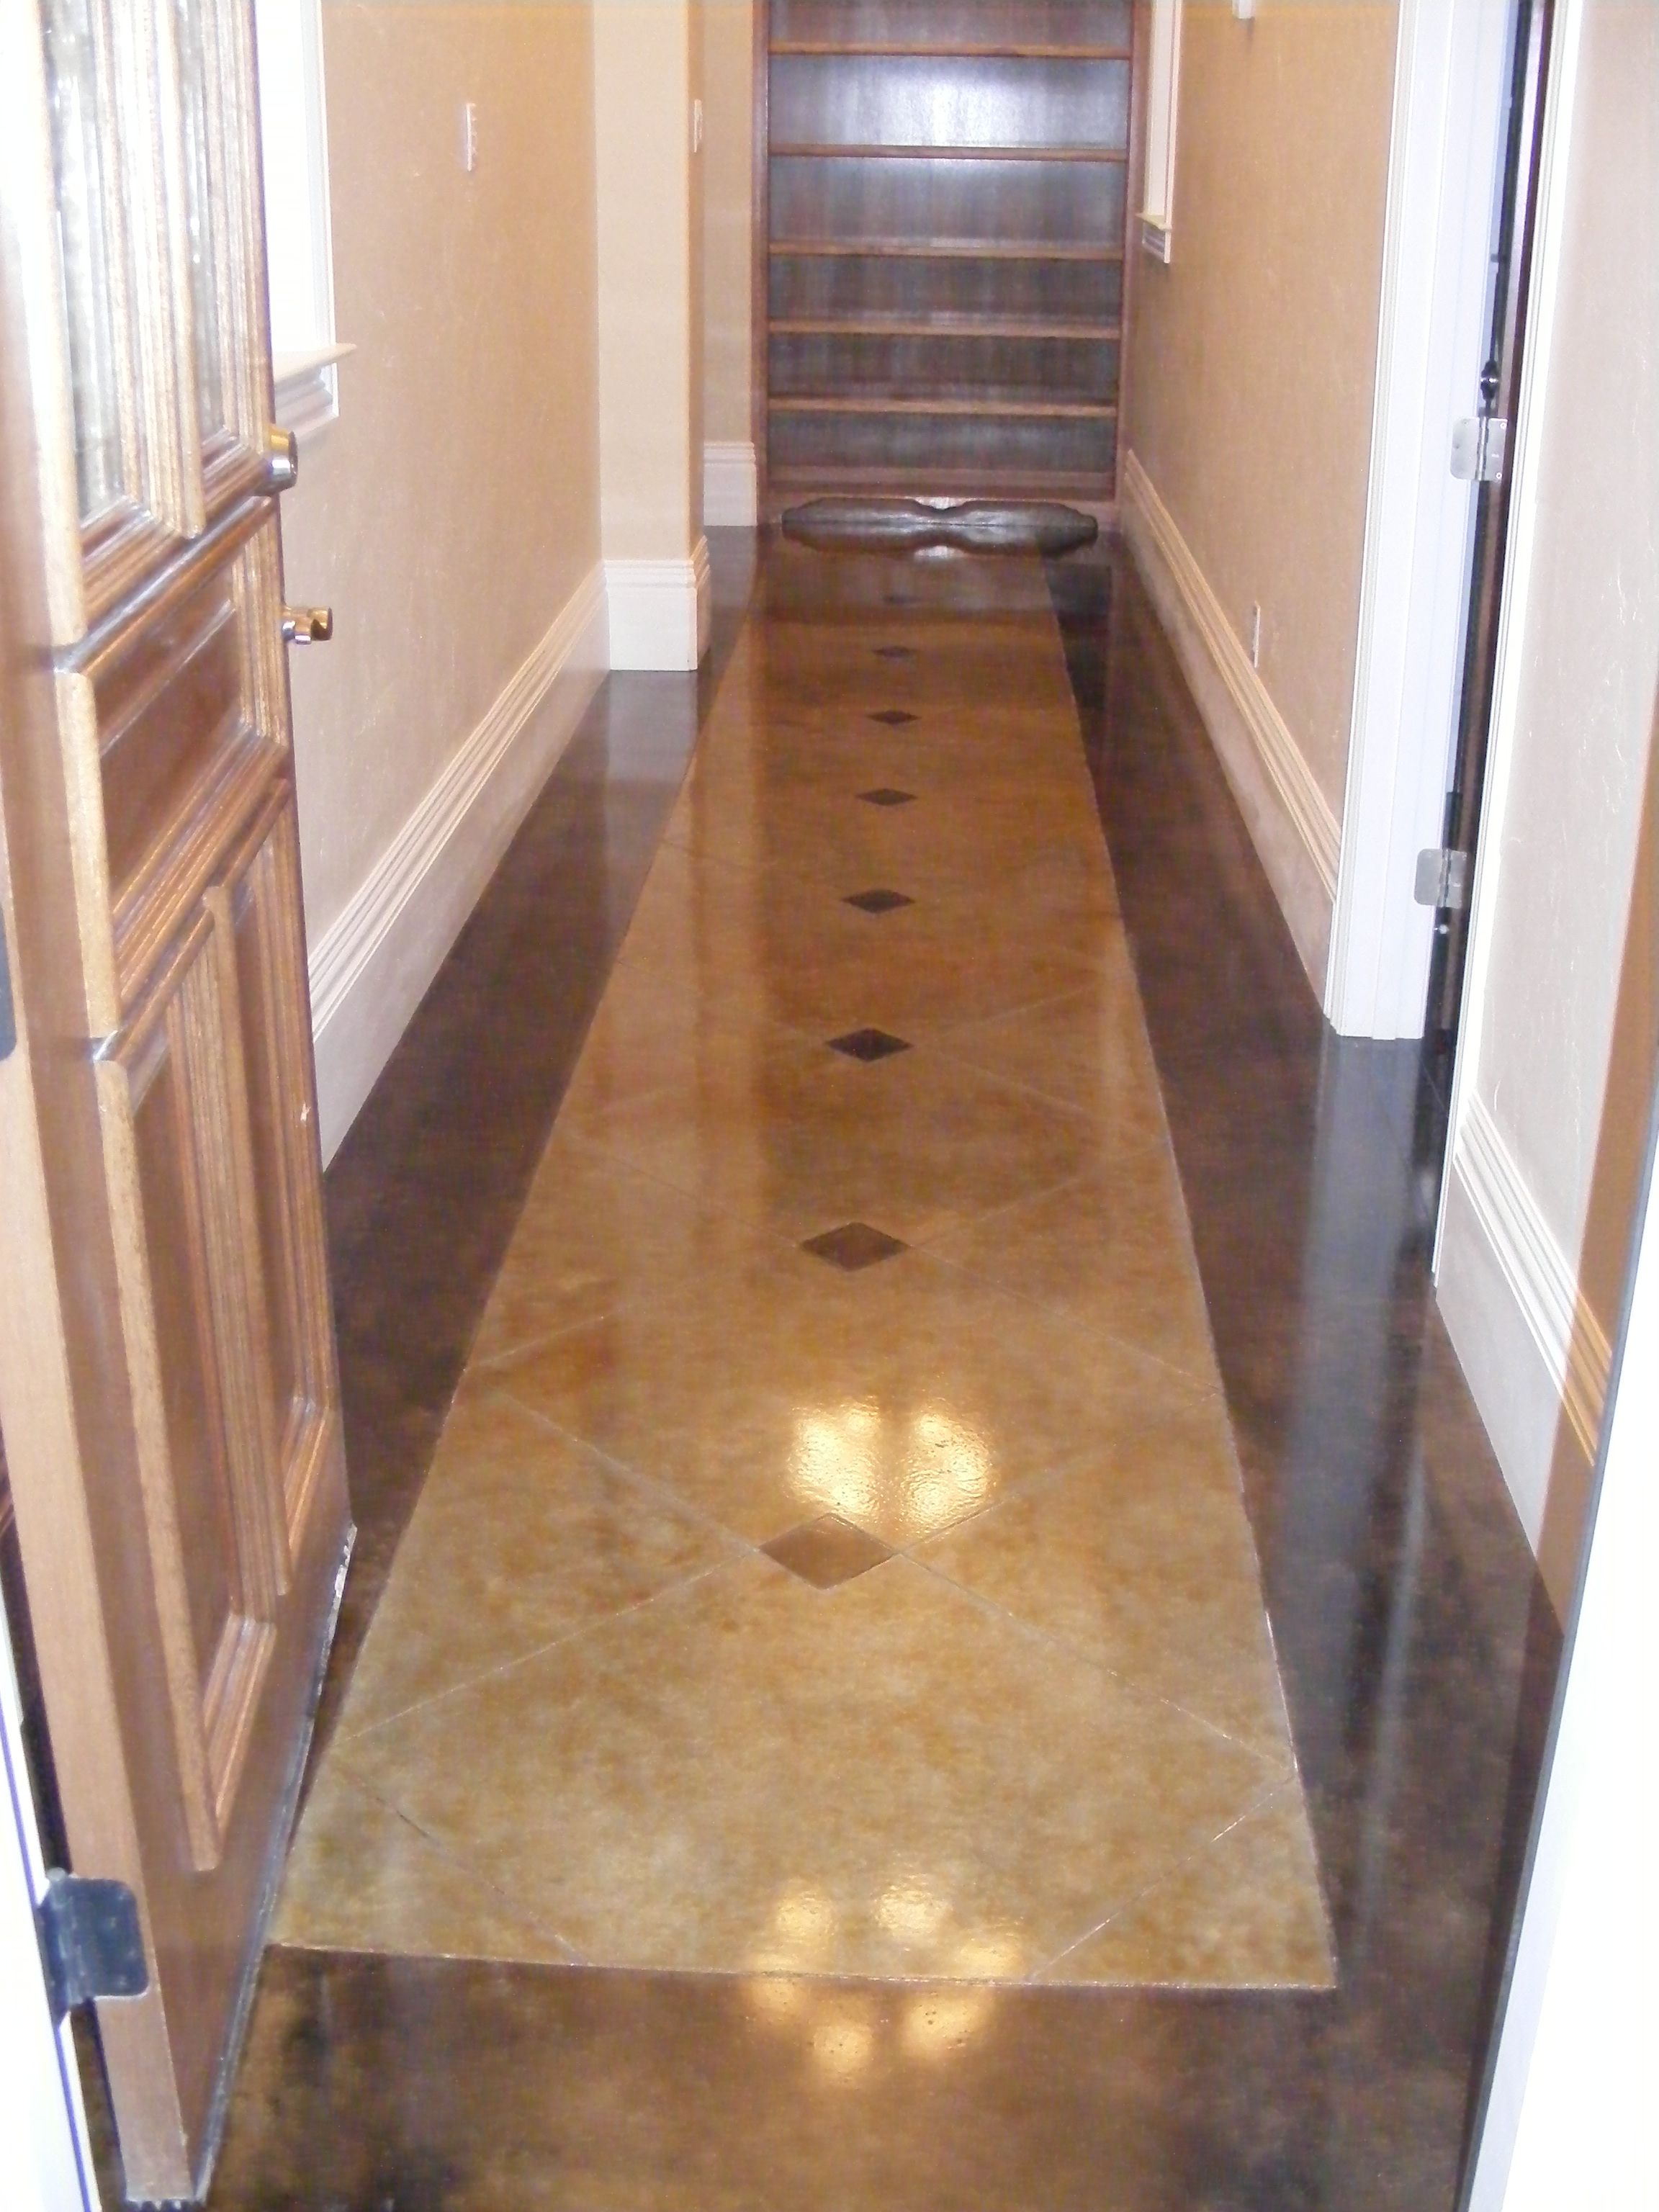 Stained and Scored Hallway | Acid Stained Concrete | Pinterest ...